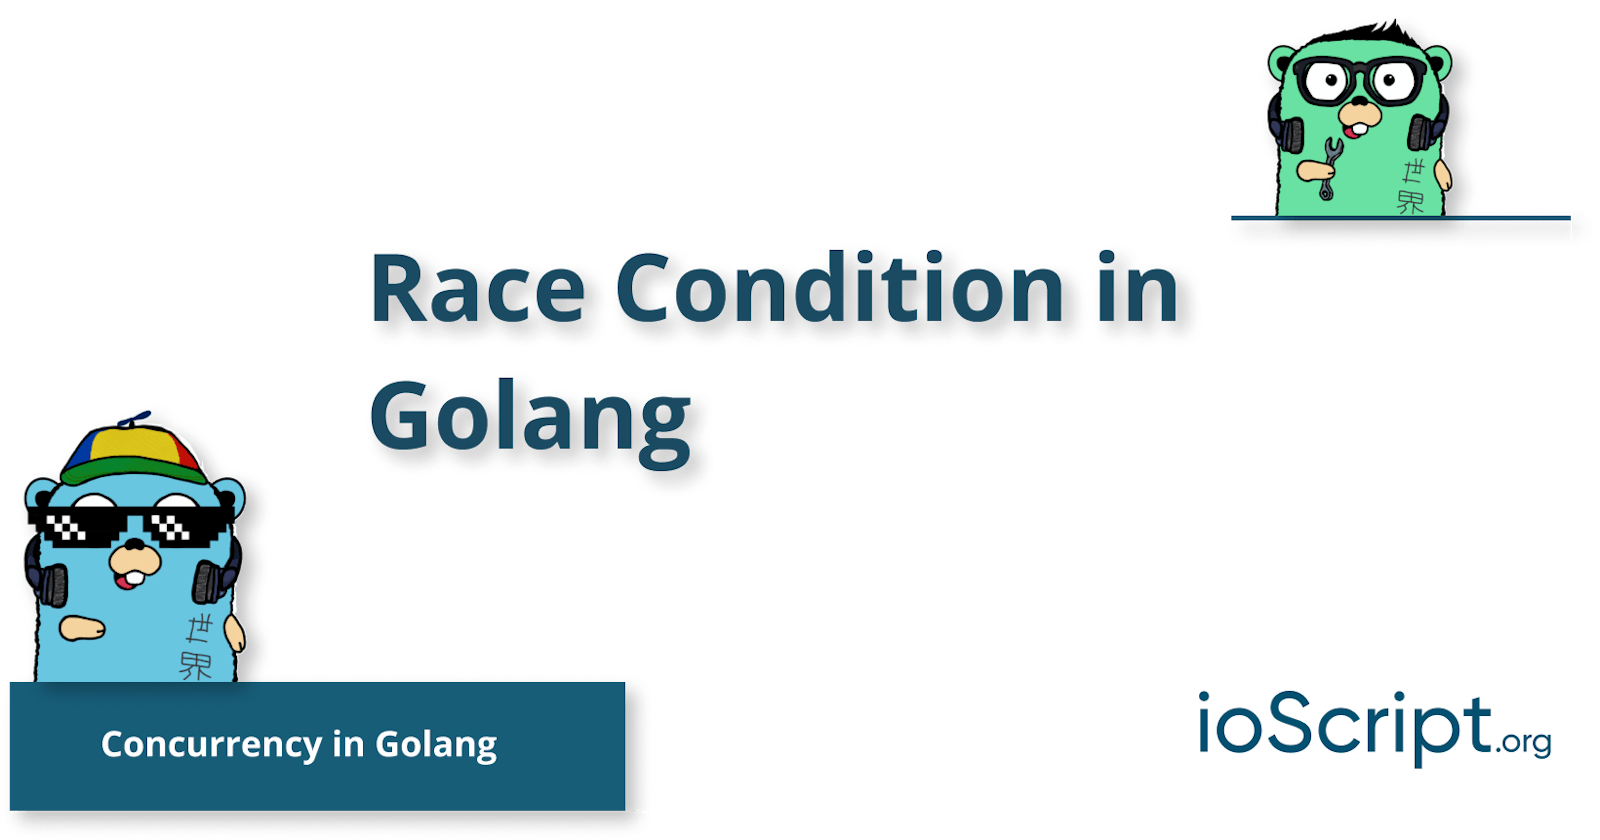 Race Condition in Golang